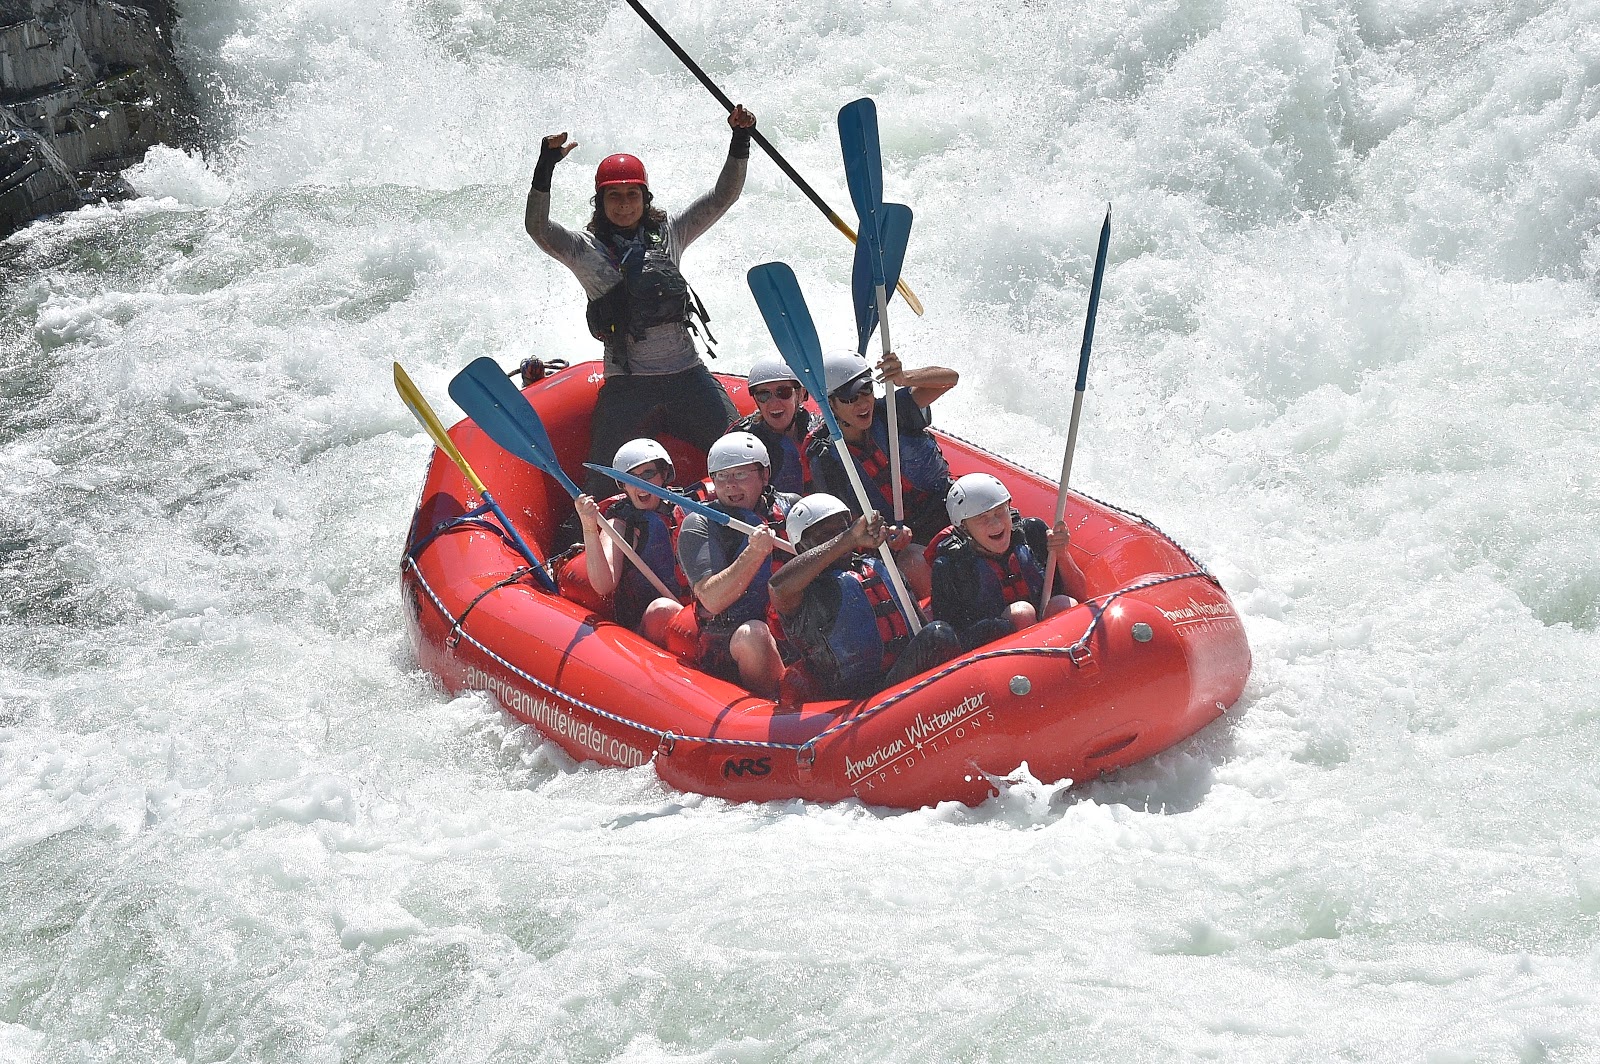 Whitewater Rafting The Middle Fork of The American River